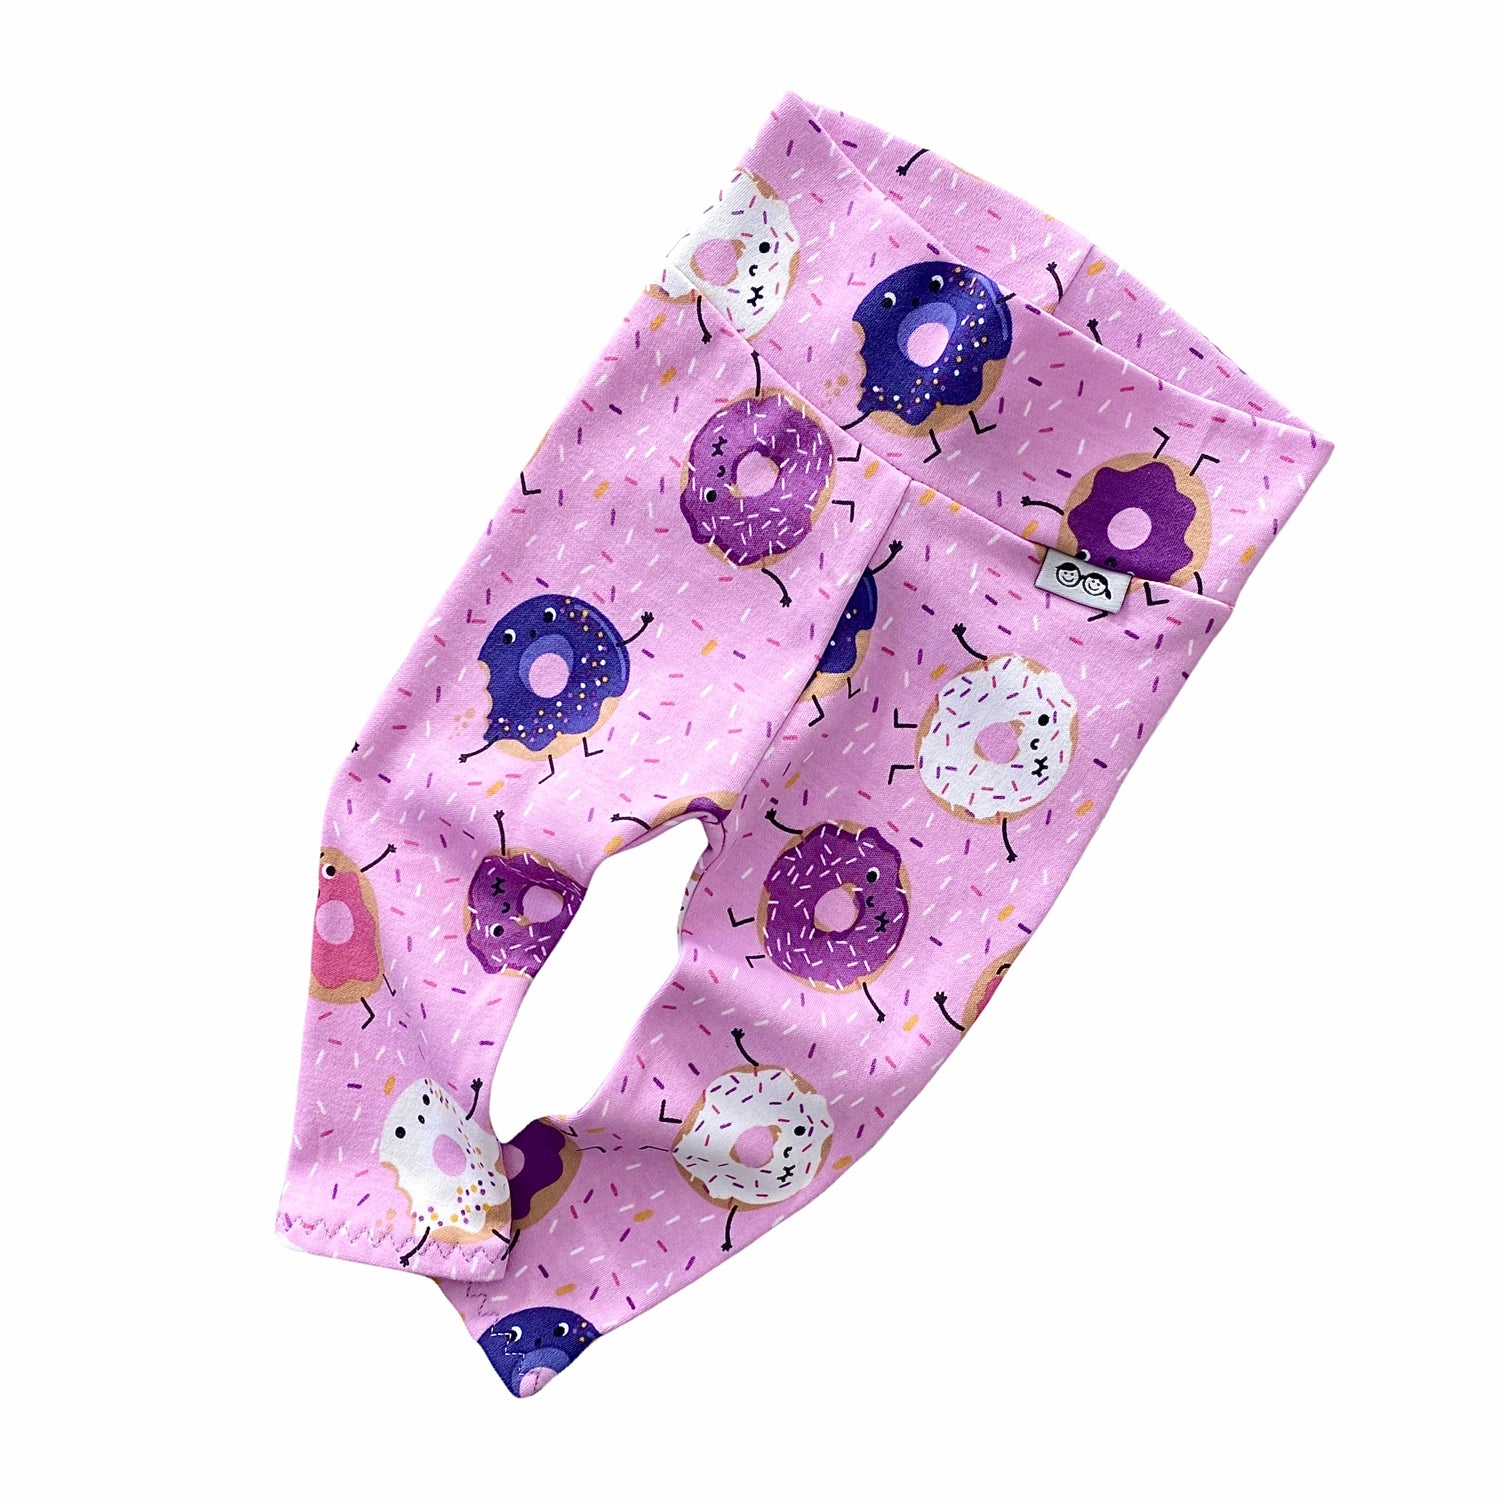 Purple Donuts Leggings and/or Headbands